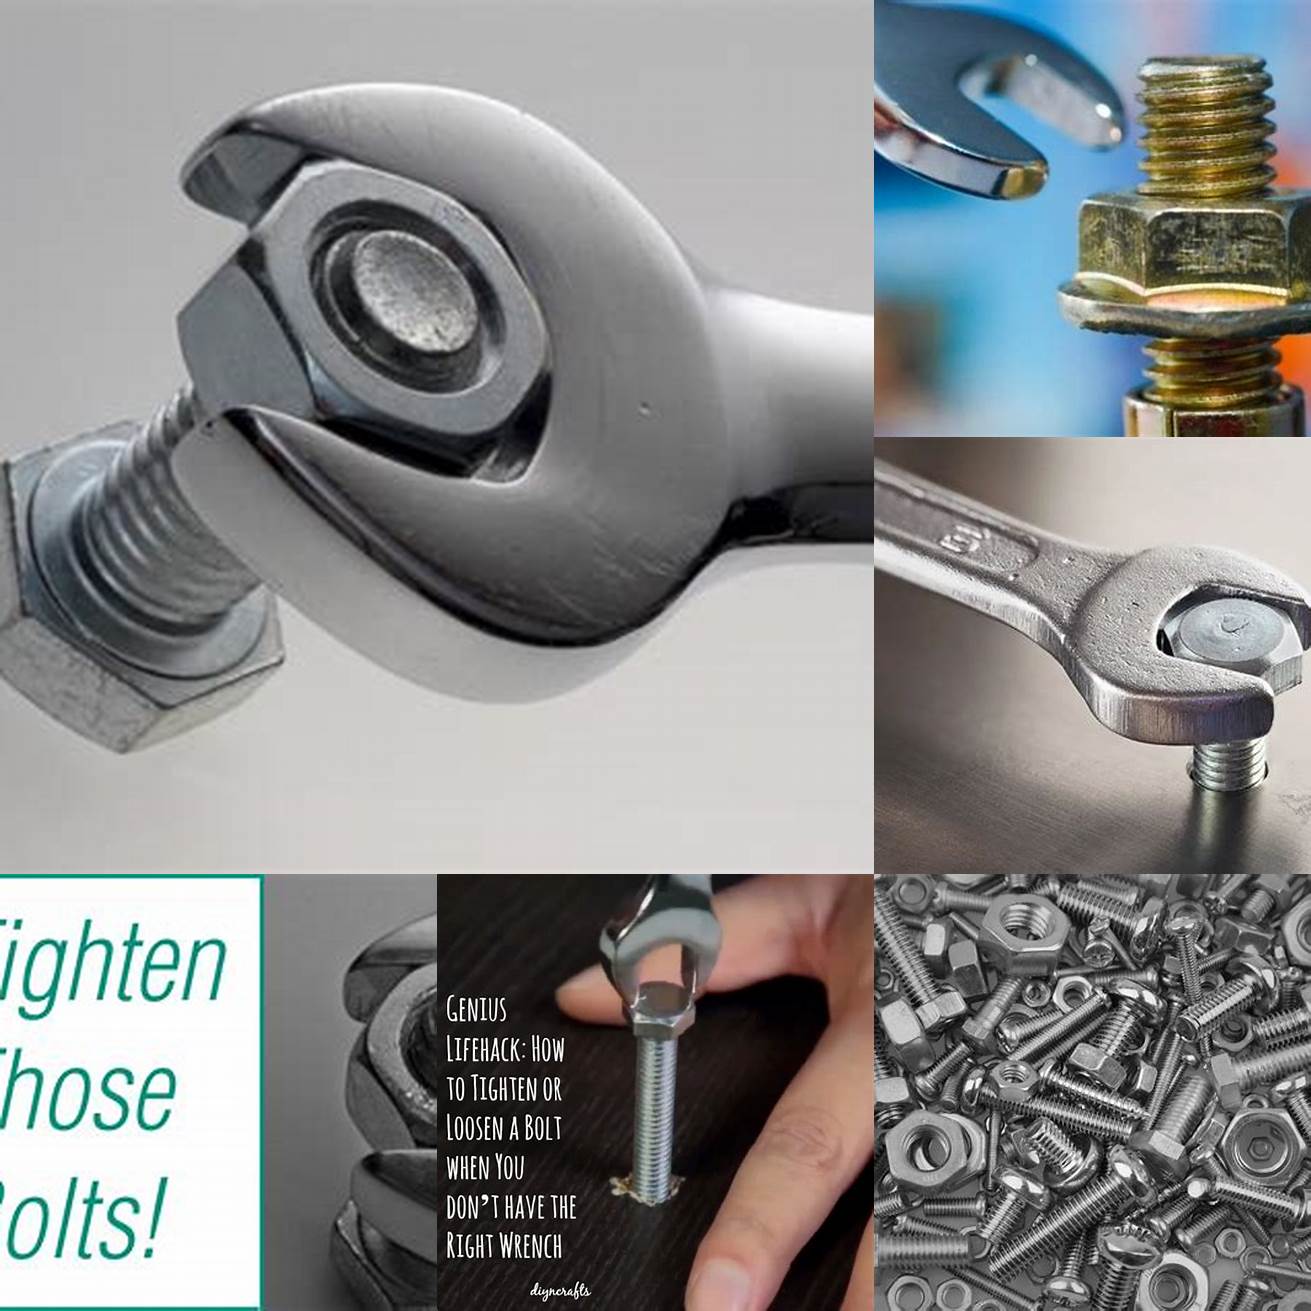 Tighten screws and bolts regularly